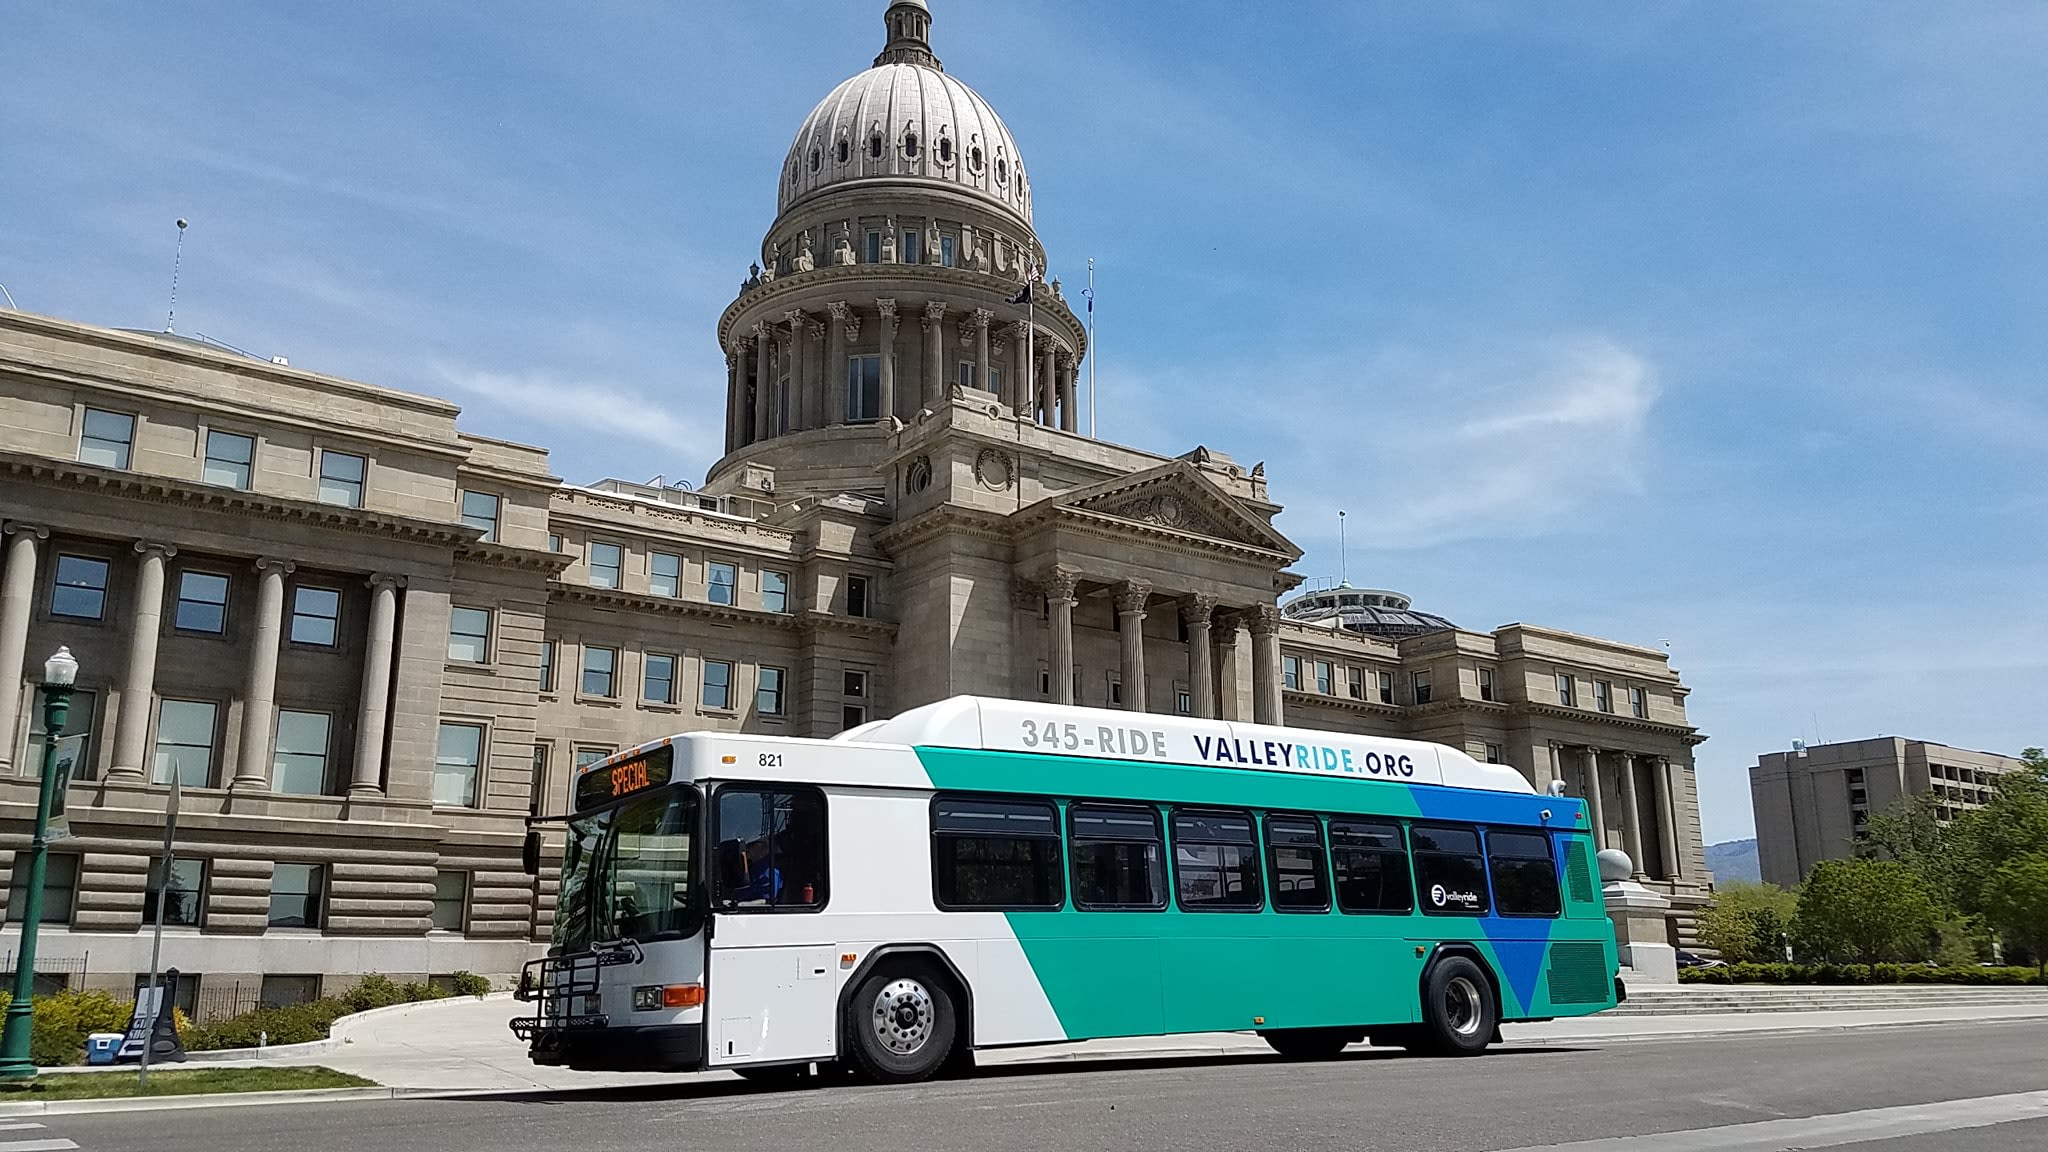 VRT's new bus network in Boise offers fare-free first week